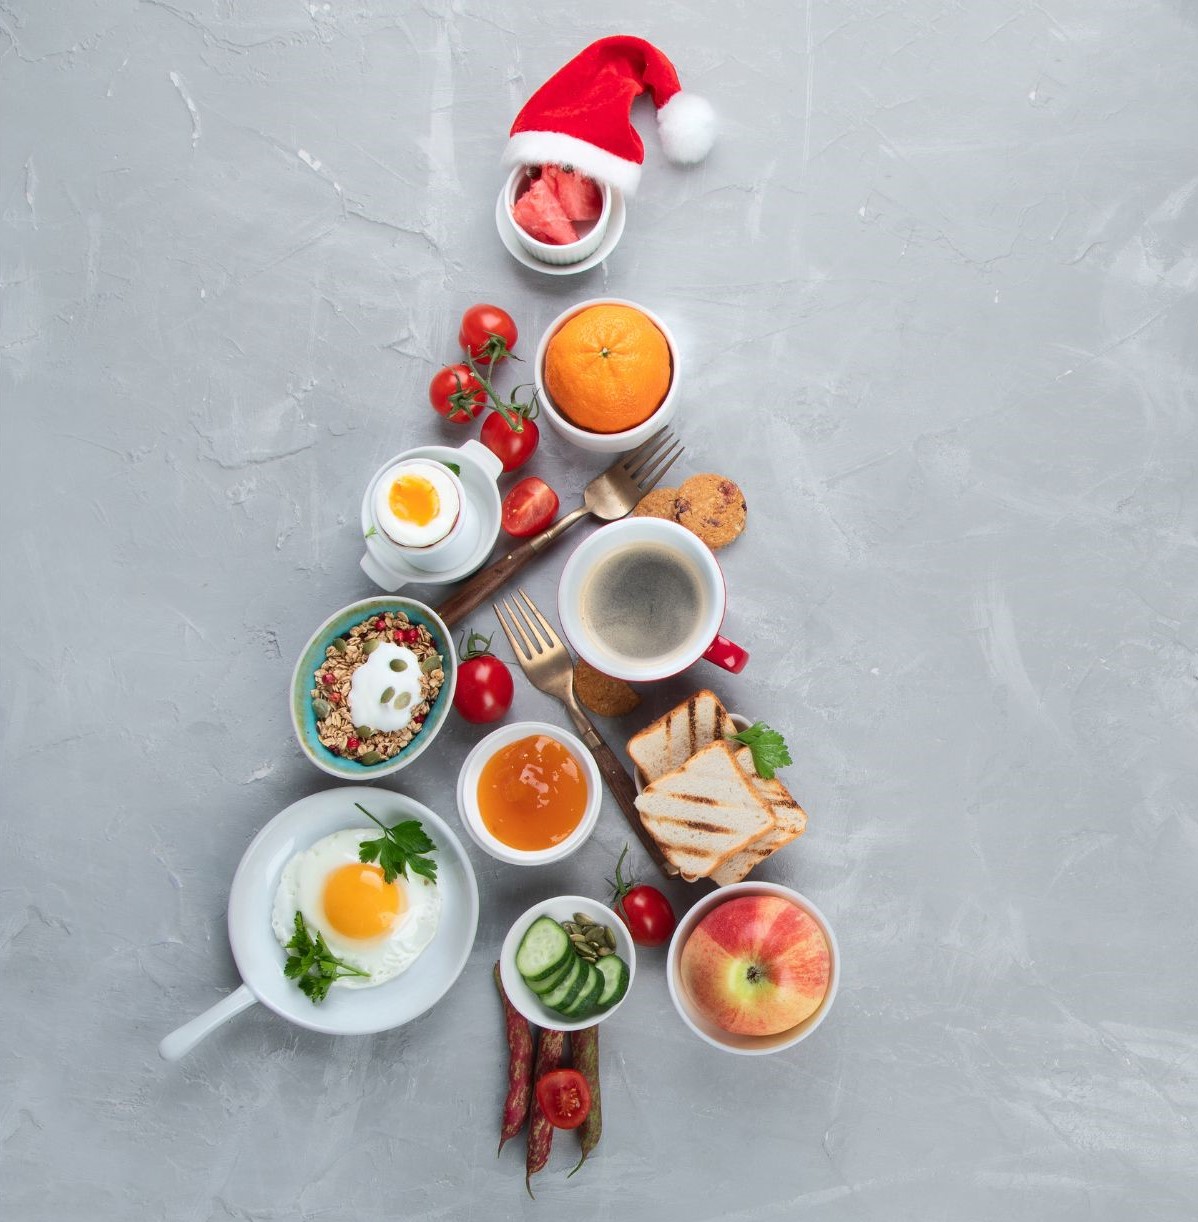 Cups of healthy foods arranged as a Christmas tree, to help maintain stepmom healthy habits